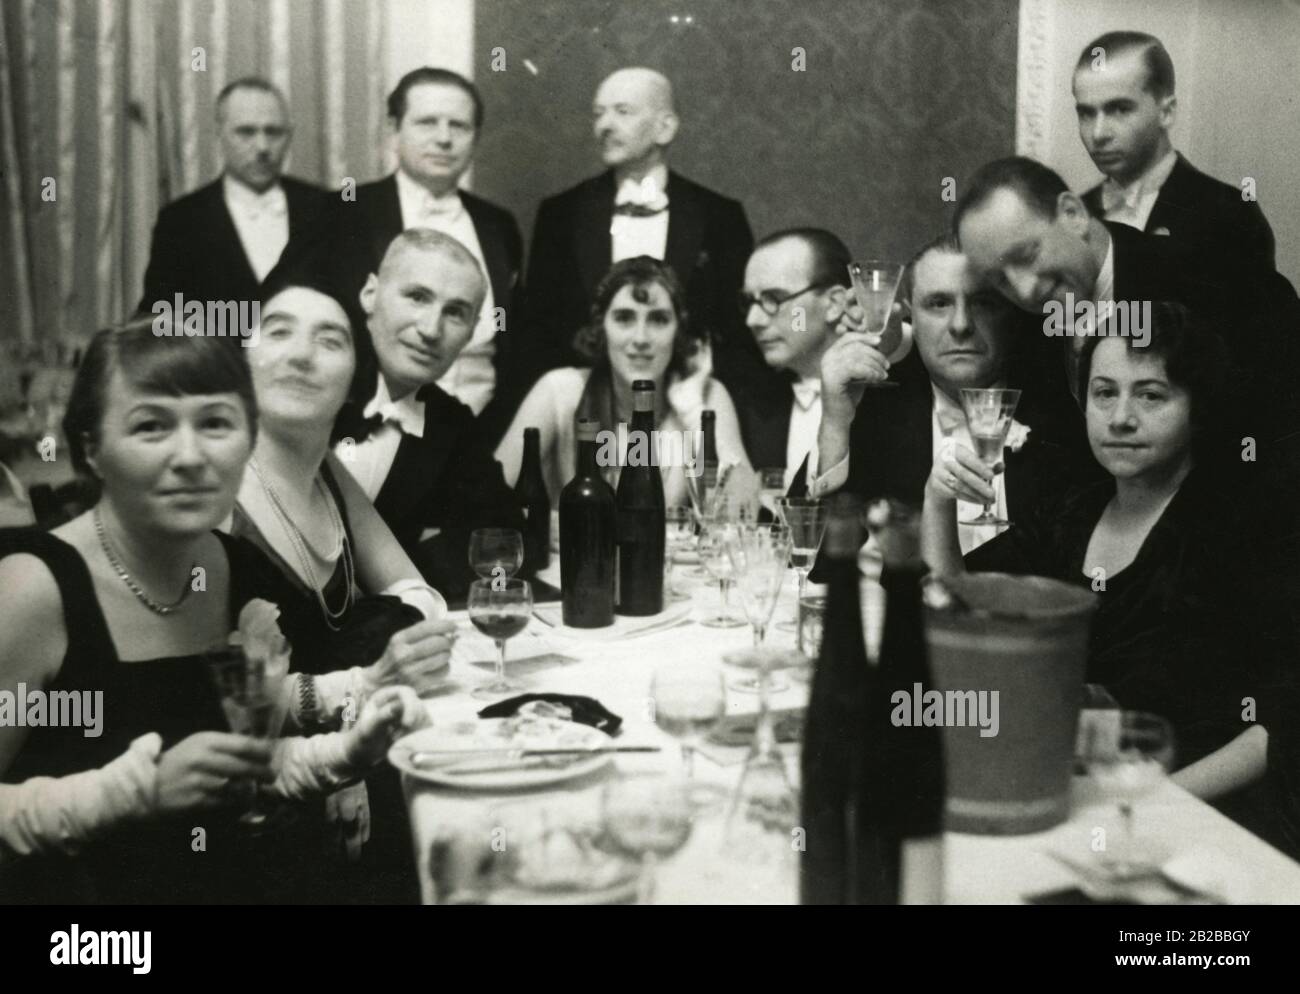 The table of the Berlin Secession at the Presseball. From left to right: Mrs. Fritsch, Abramcyck, Ernst Frisch, Ludwig Dettmann, Miss Hauker, Wolf Rohricht, Dr. Hartmann, Charl. Berend-Corinth, Prof. Max Pechstein. Stock Photo